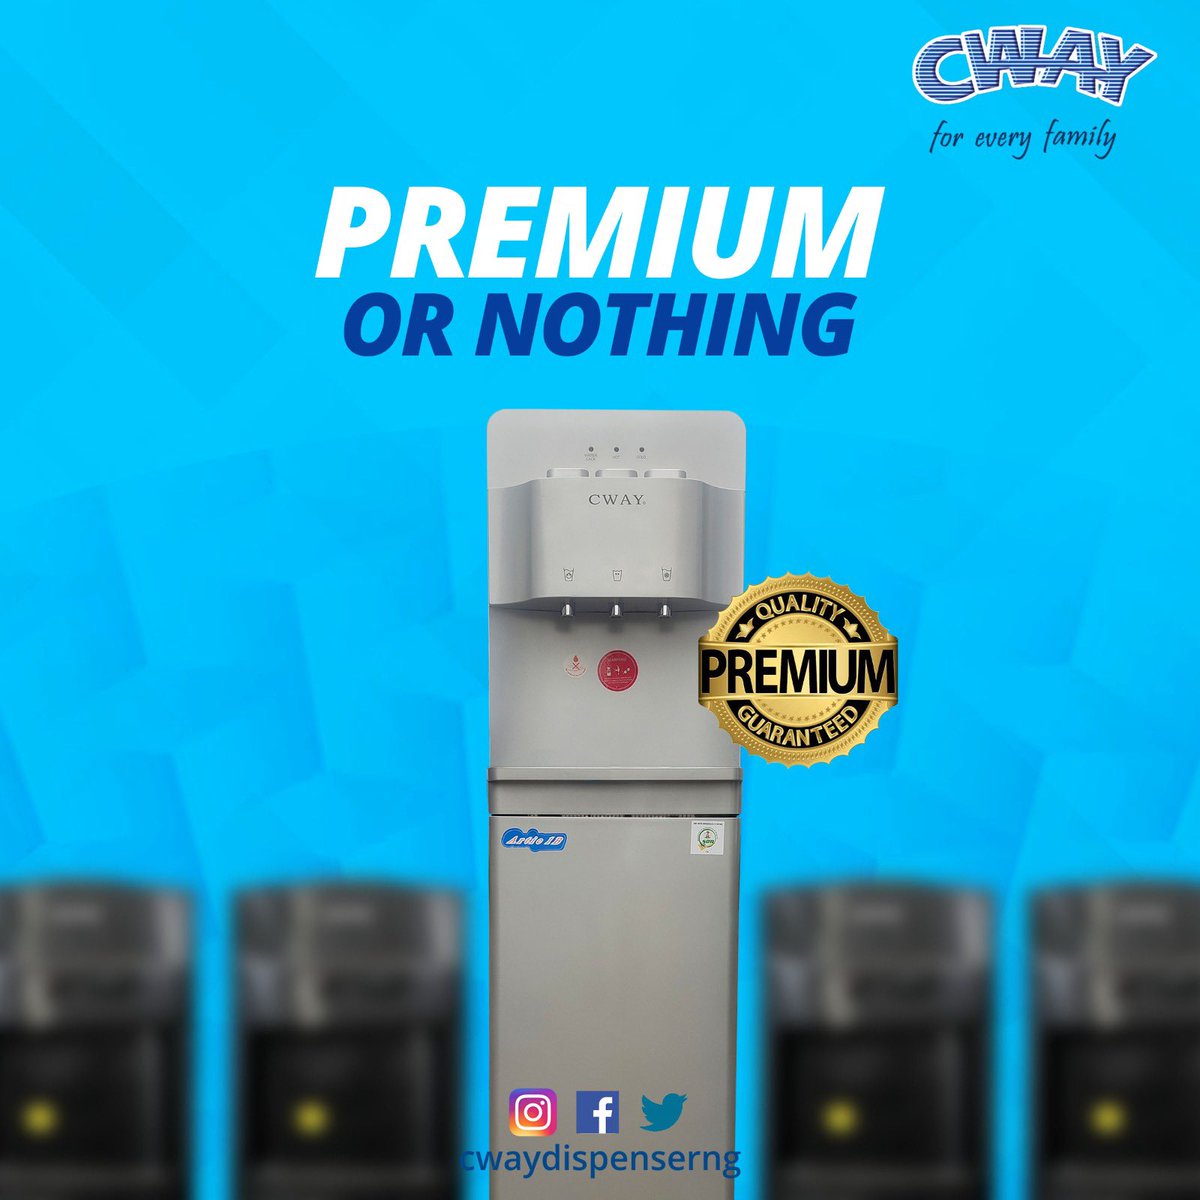 When it comes to water dispensers, accept nothing but the best. Choose CWAY Water Dispenser for the best in class! 💦✨ #CWAY #PremiumQuality #ElevateYourHydration